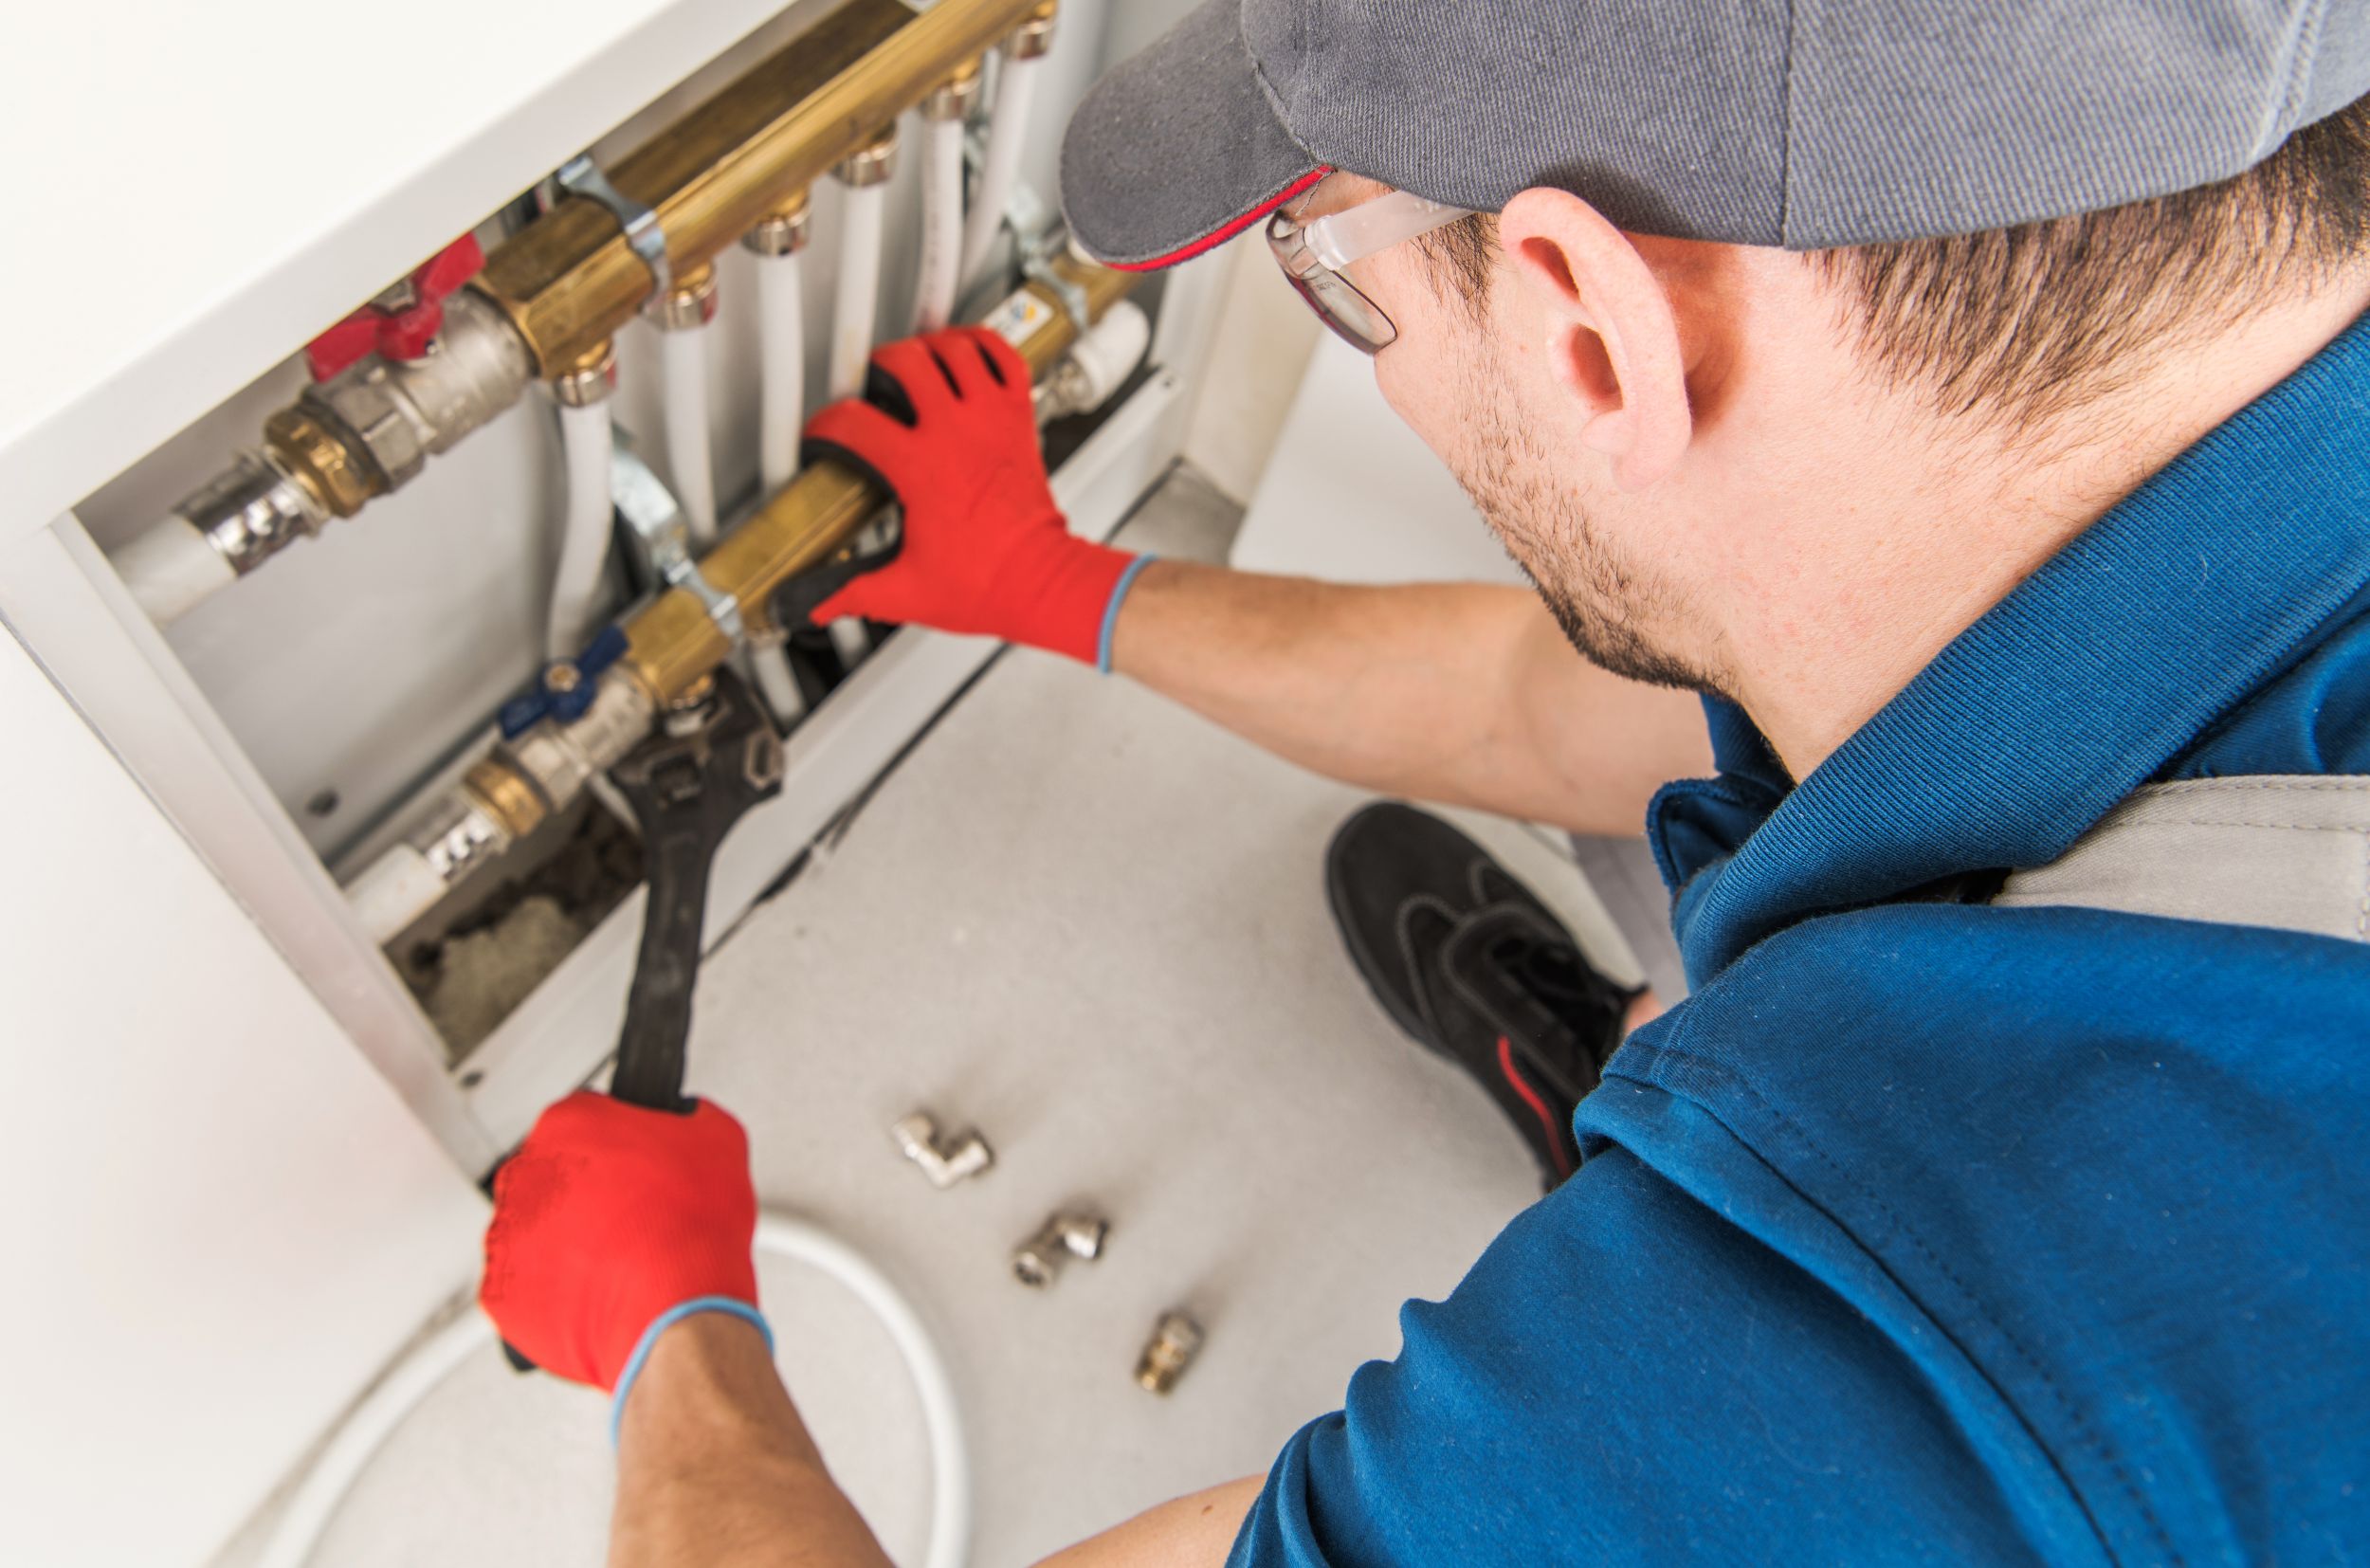 Top-notch Plumbing Service for Your Needs"